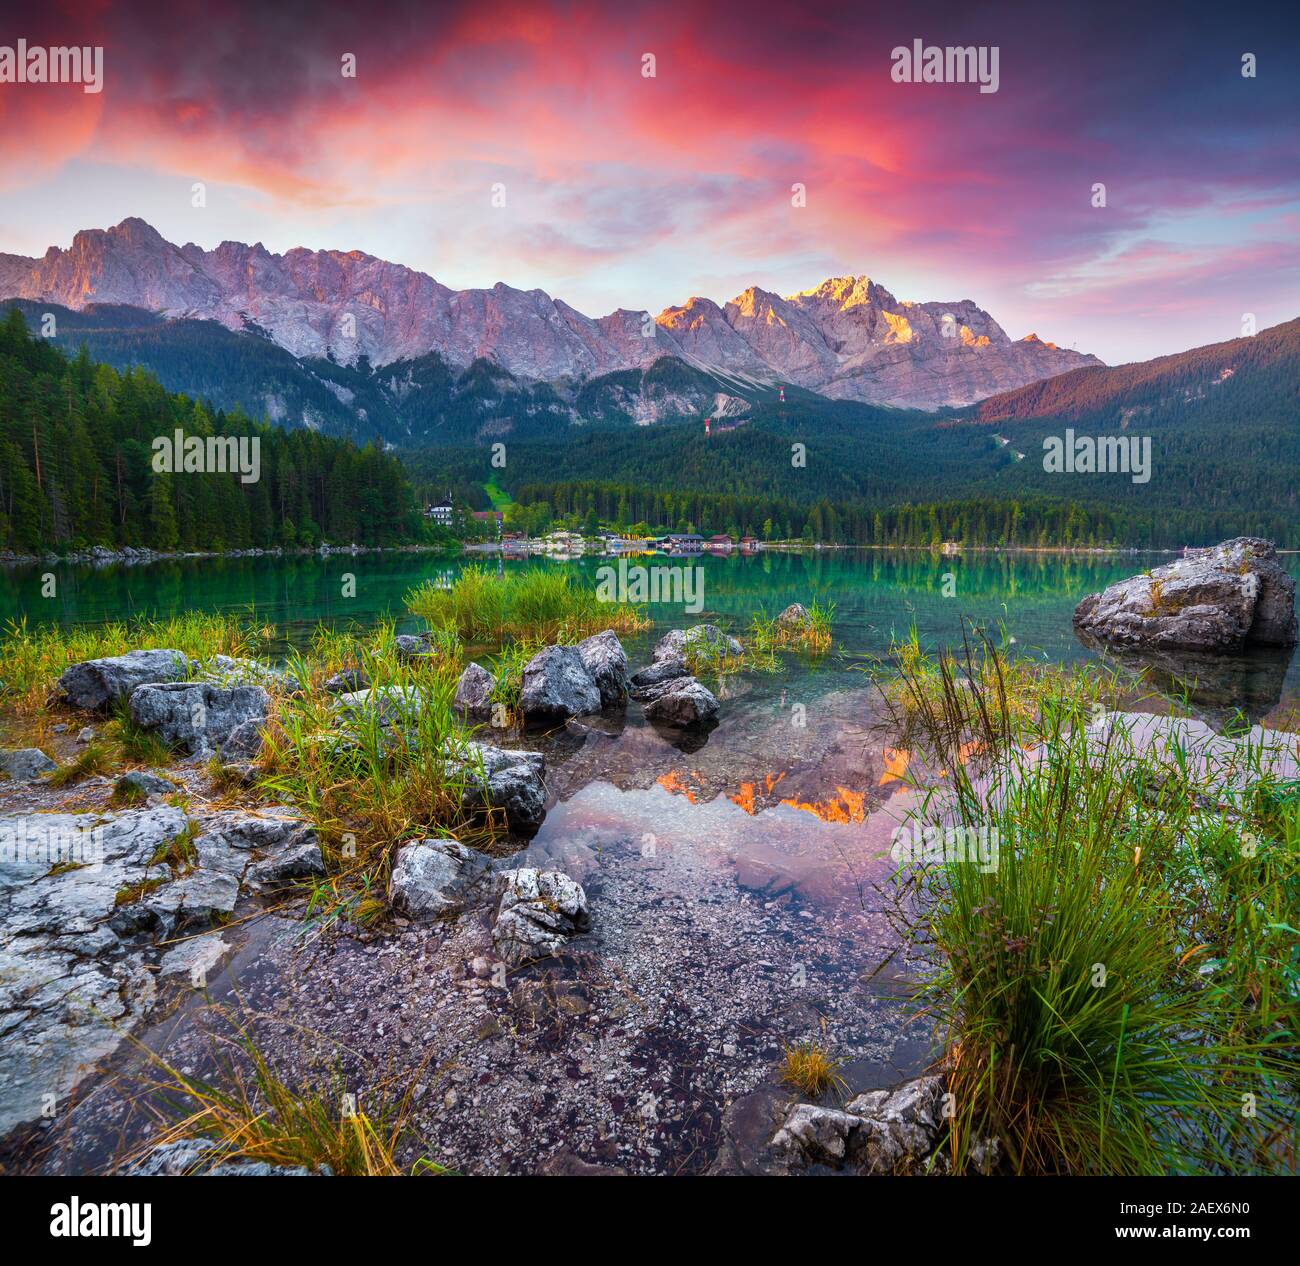 Colorful summer scene on the Eibsee lake in German Alps. Germany's highest mountain Zugspitze 2 962 m, and it's mountain ridge in the first rays of su Stock Photo